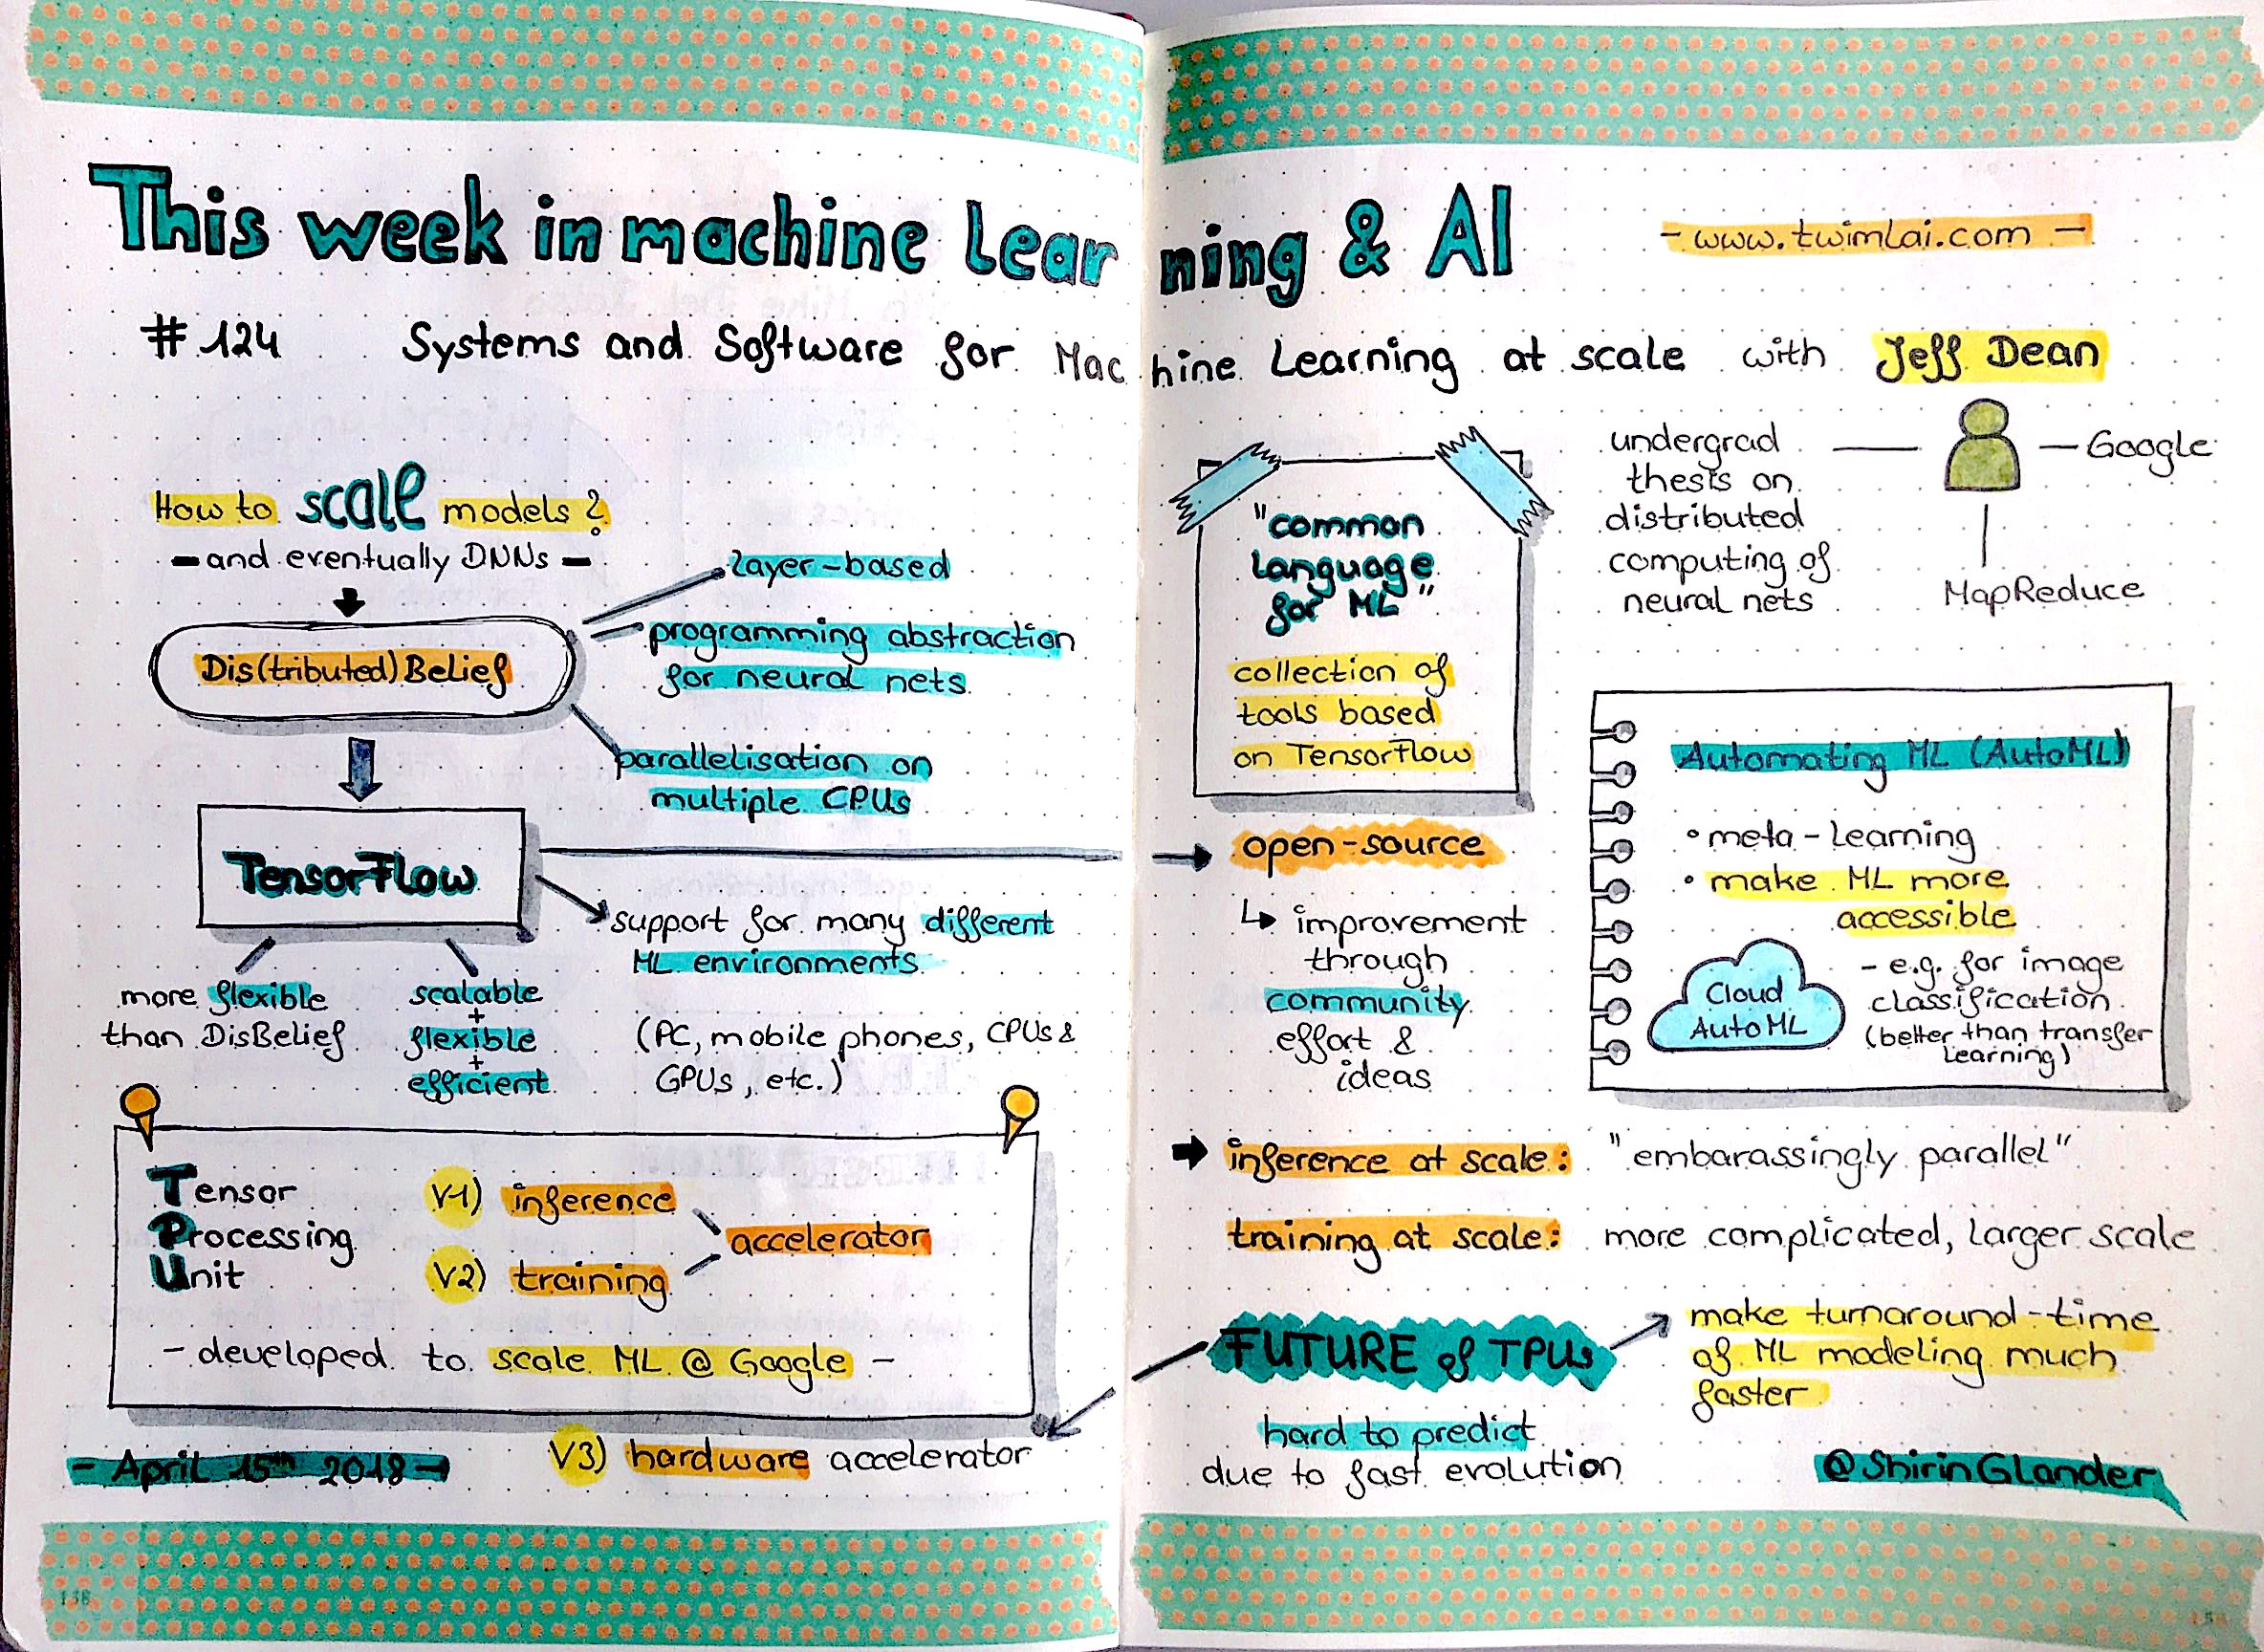 Sketchnotes from TWiMLAI talk #124: Systems and Software for Machine Learning at Scale with Jeff Dean